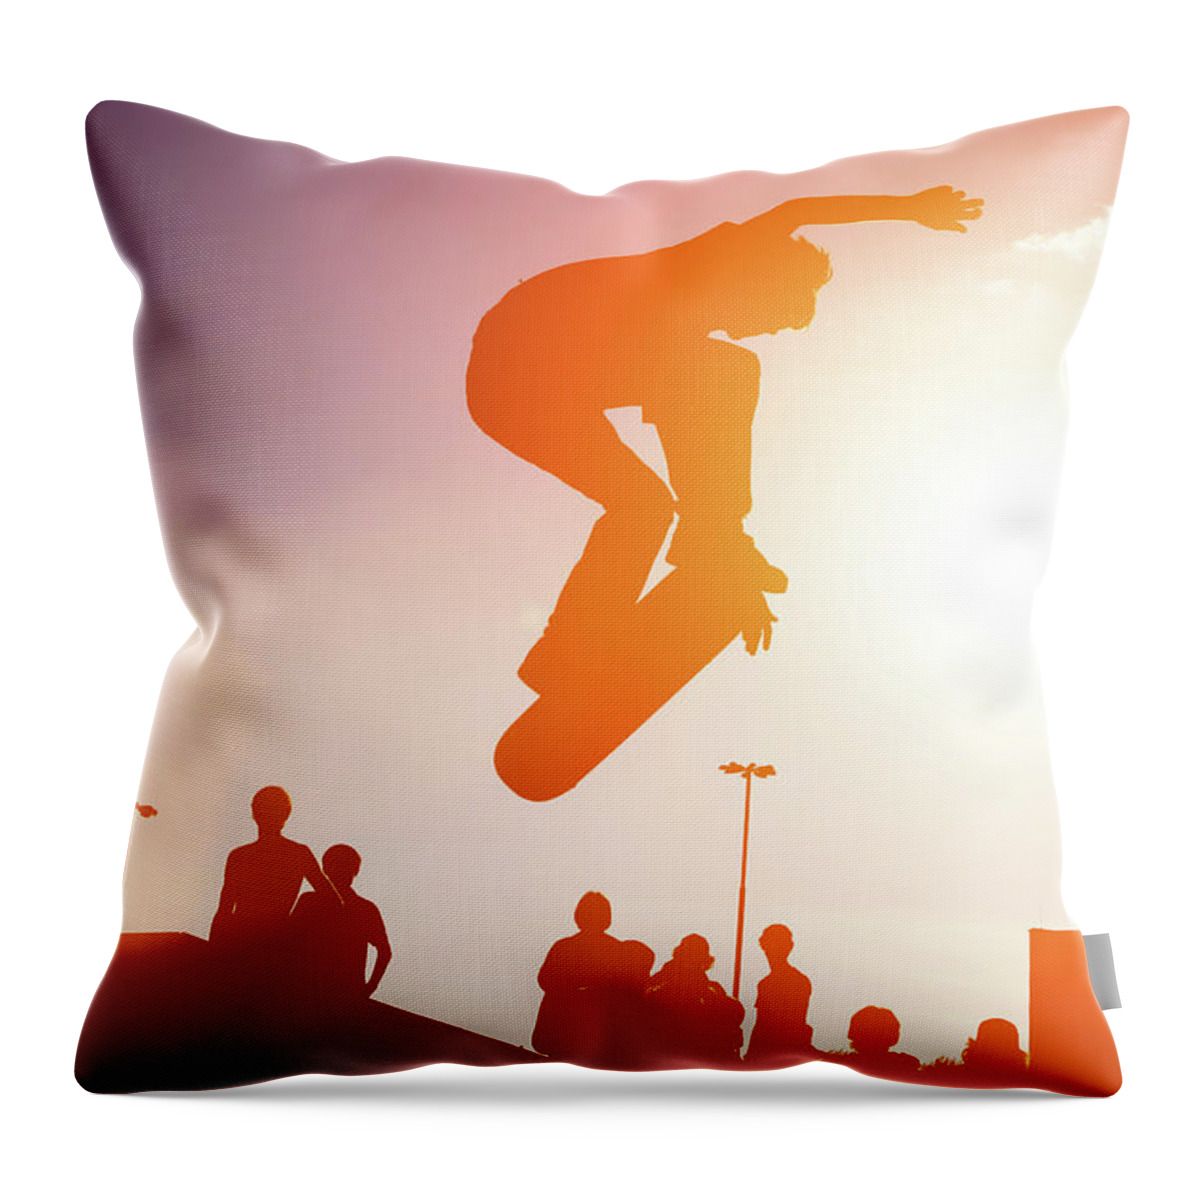 Orange Color Throw Pillow featuring the photograph Jumping Skateboarder by Logoboom